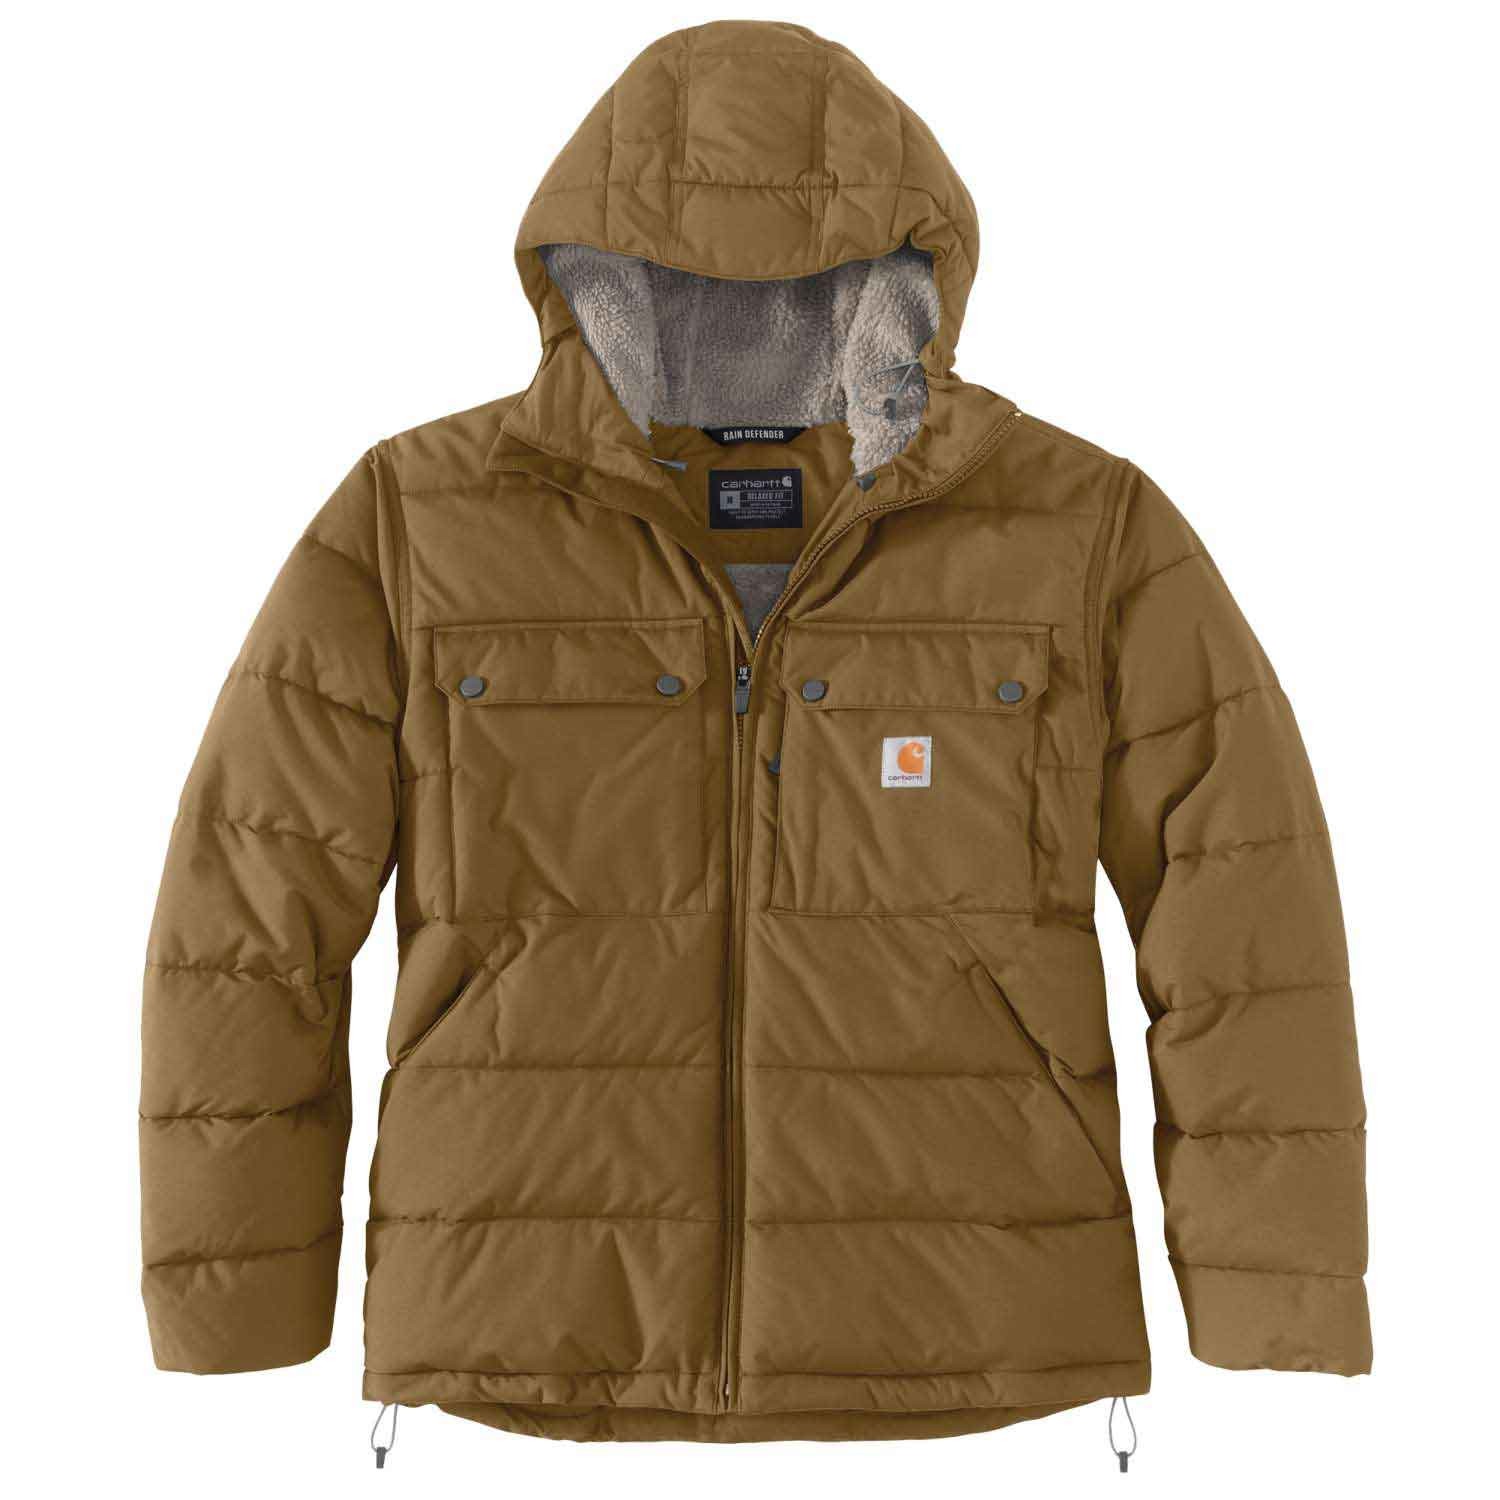 Carhartt 105474 Loose Fit Montana Insulated Jacket - Workwear Jackets -  Workwear - Best Workwear